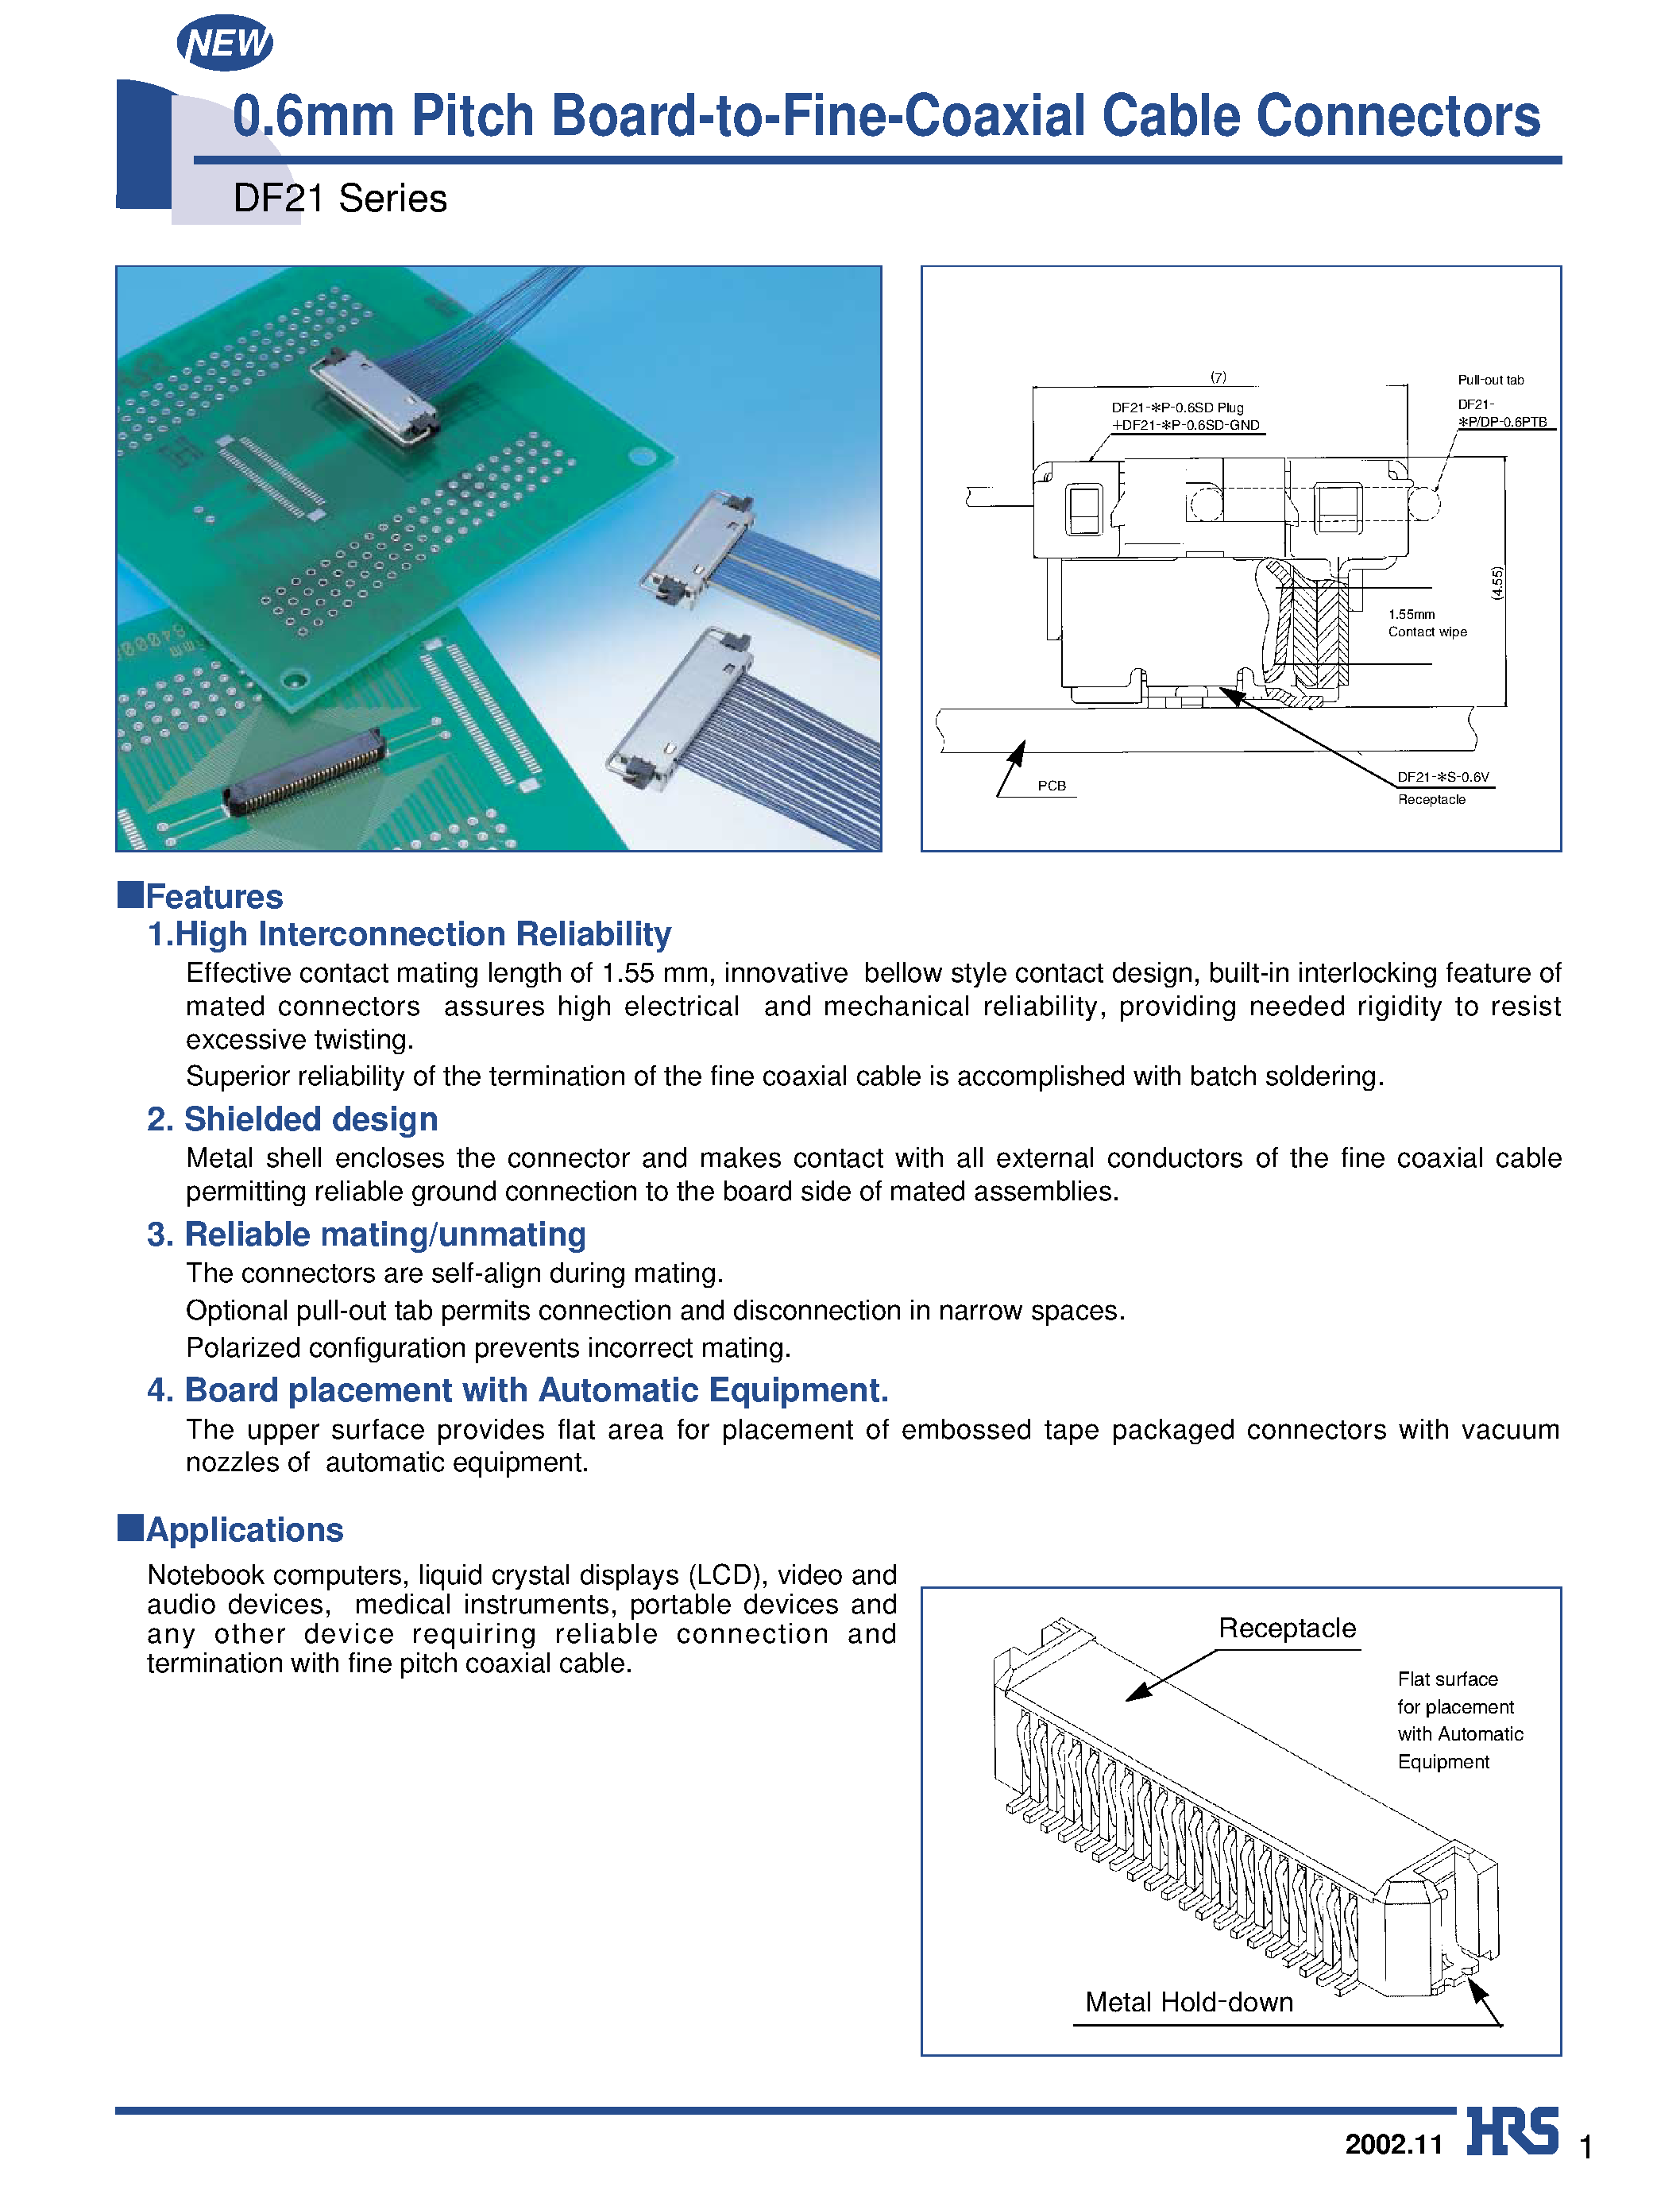 Datasheet DF21-40P-0.6SD - 0.6mm Pitch Board-to-Fine-Coaxial Cable Connectors page 1